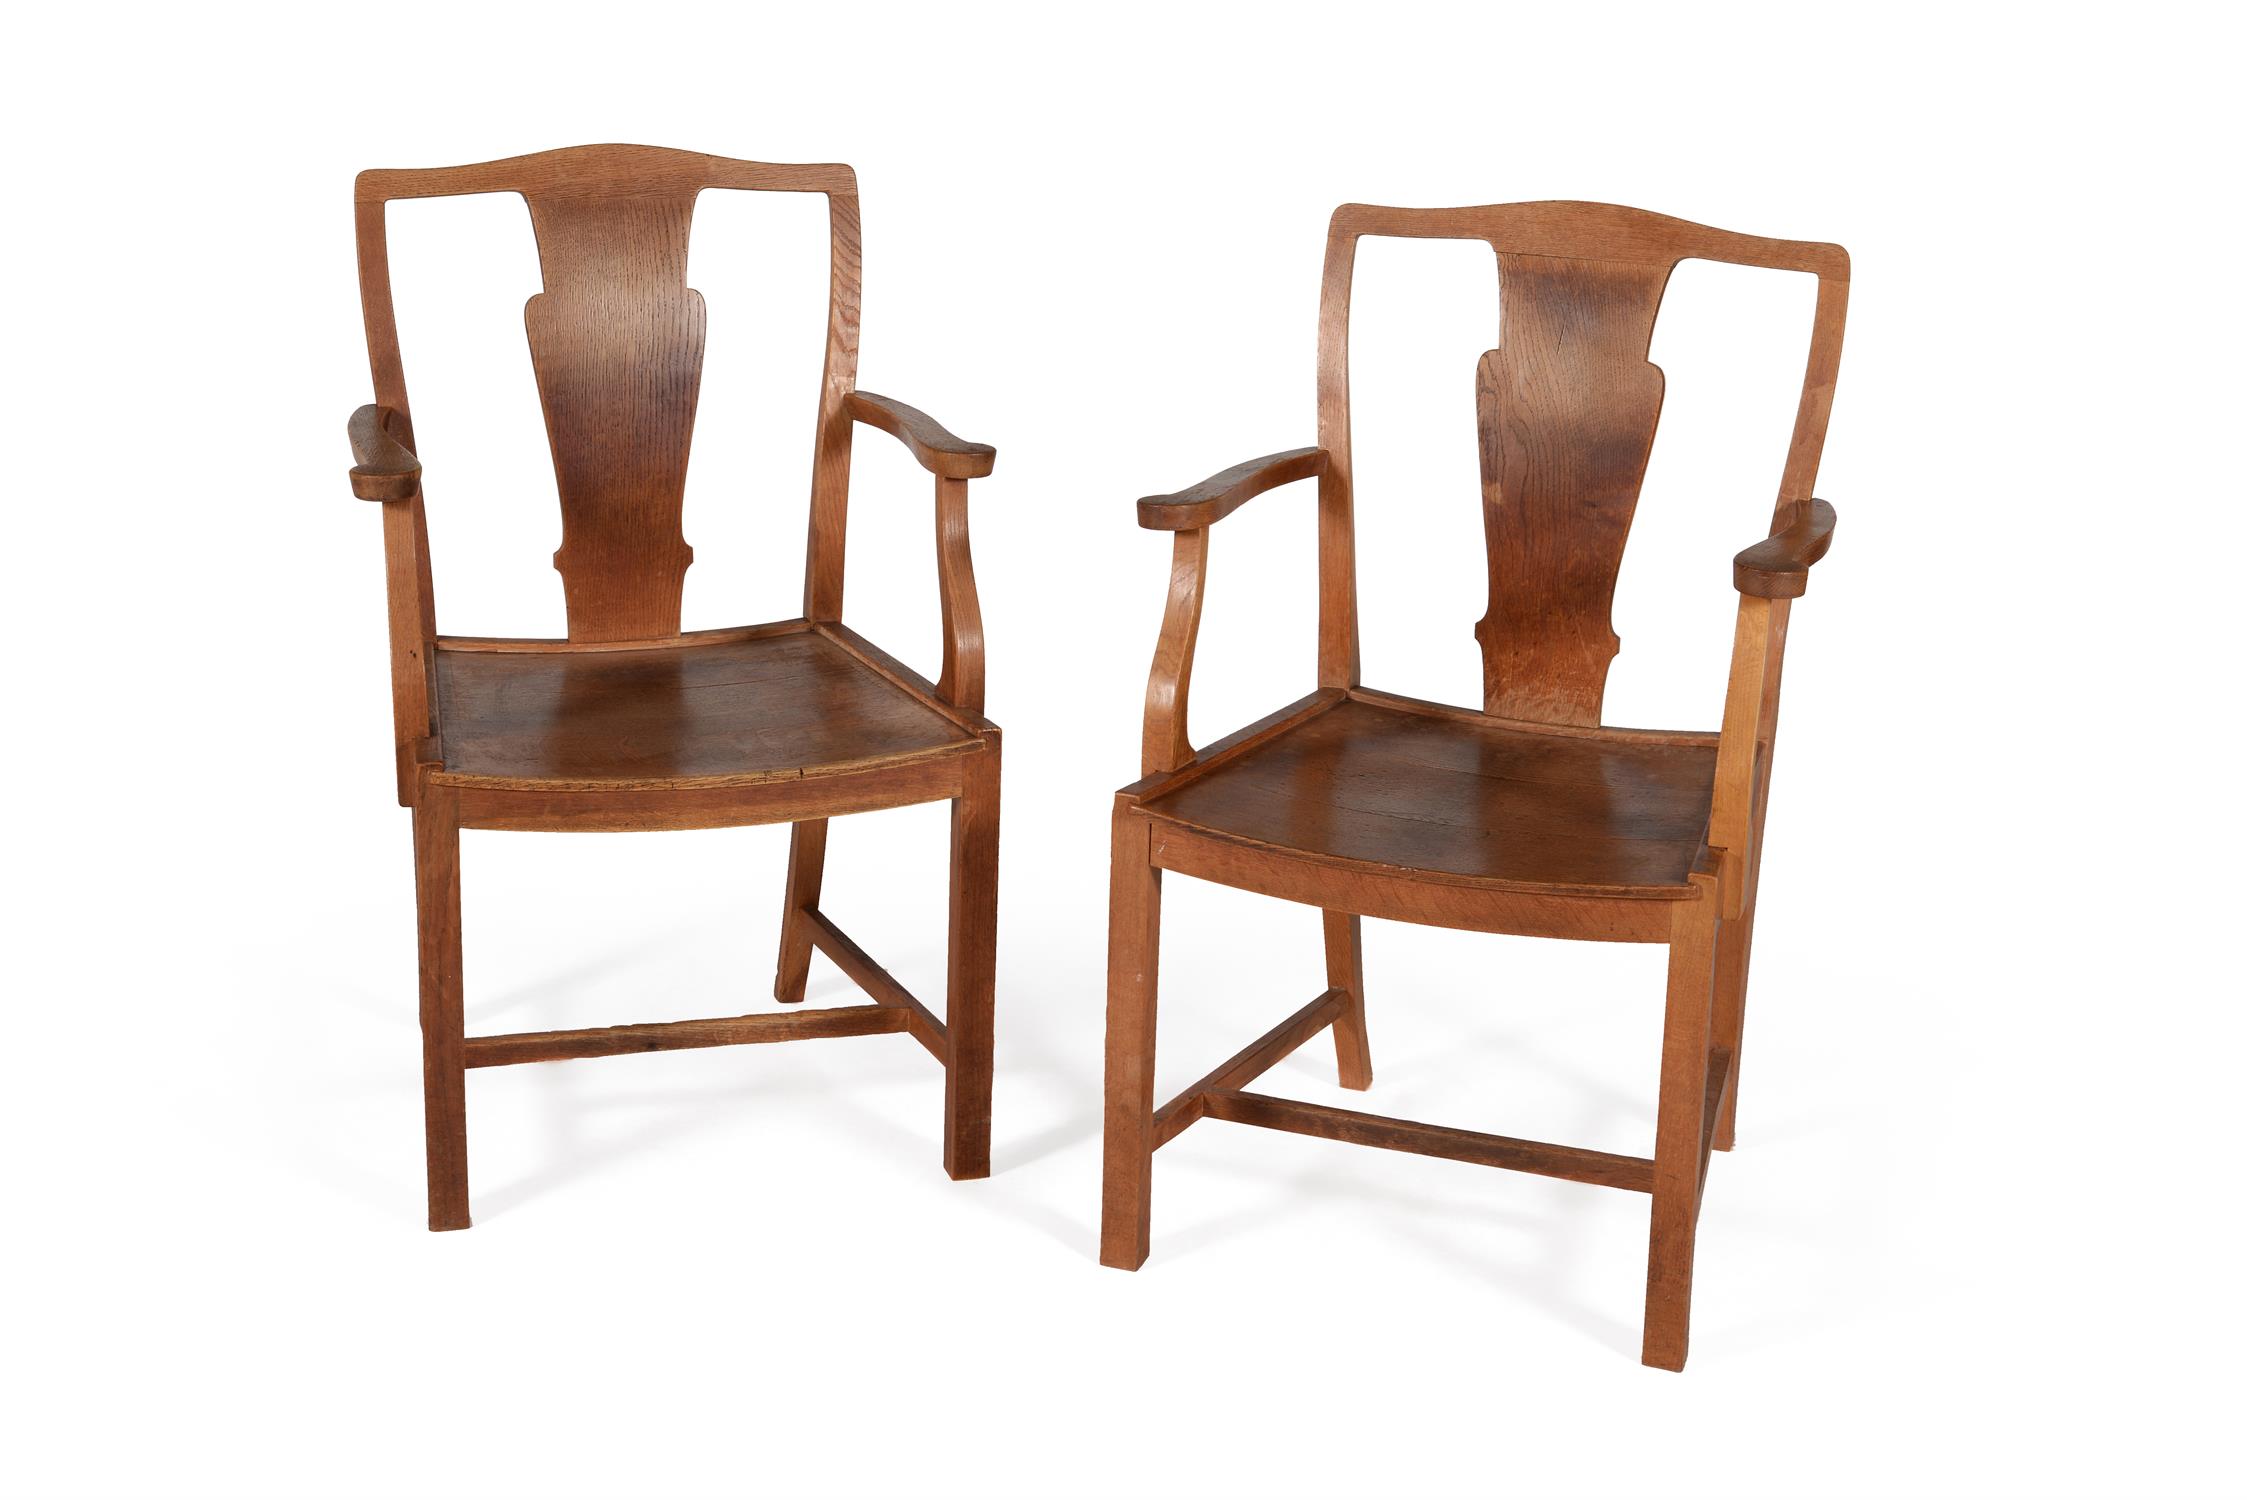 A pair of oak open armchairs, , by Heal's